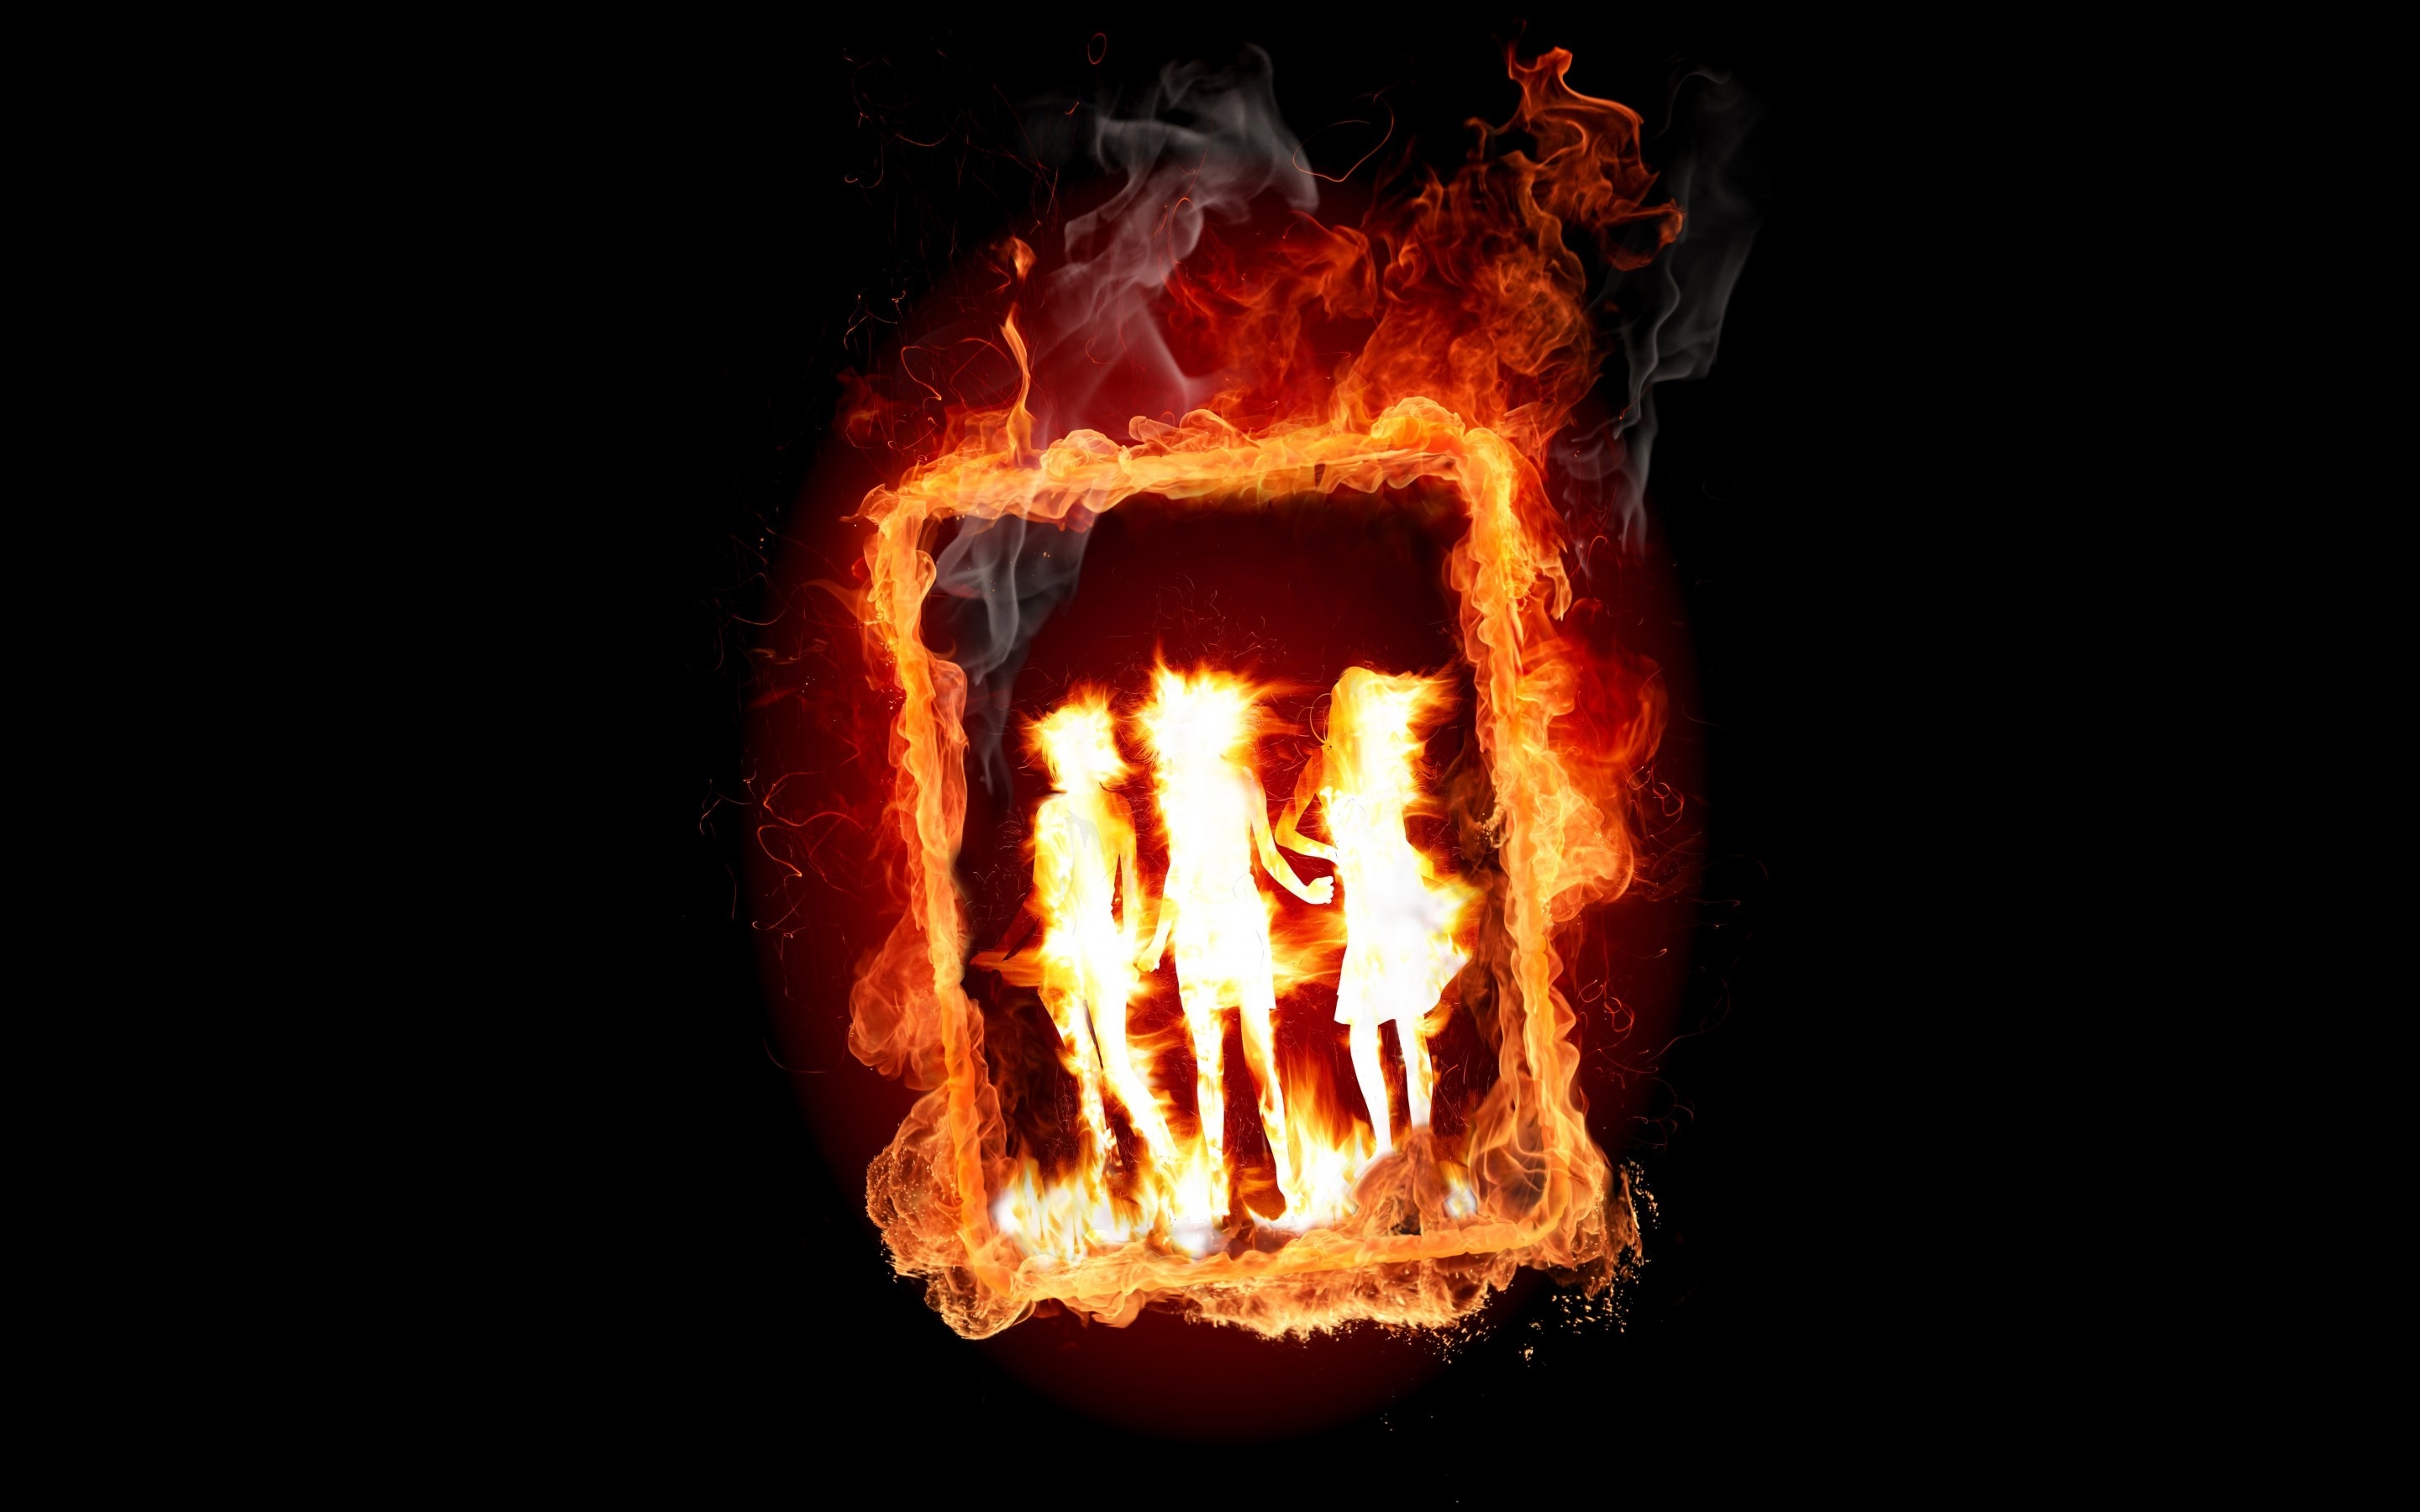 Girl Frame in Fire for 2880 x 1800 Retina Display resolution